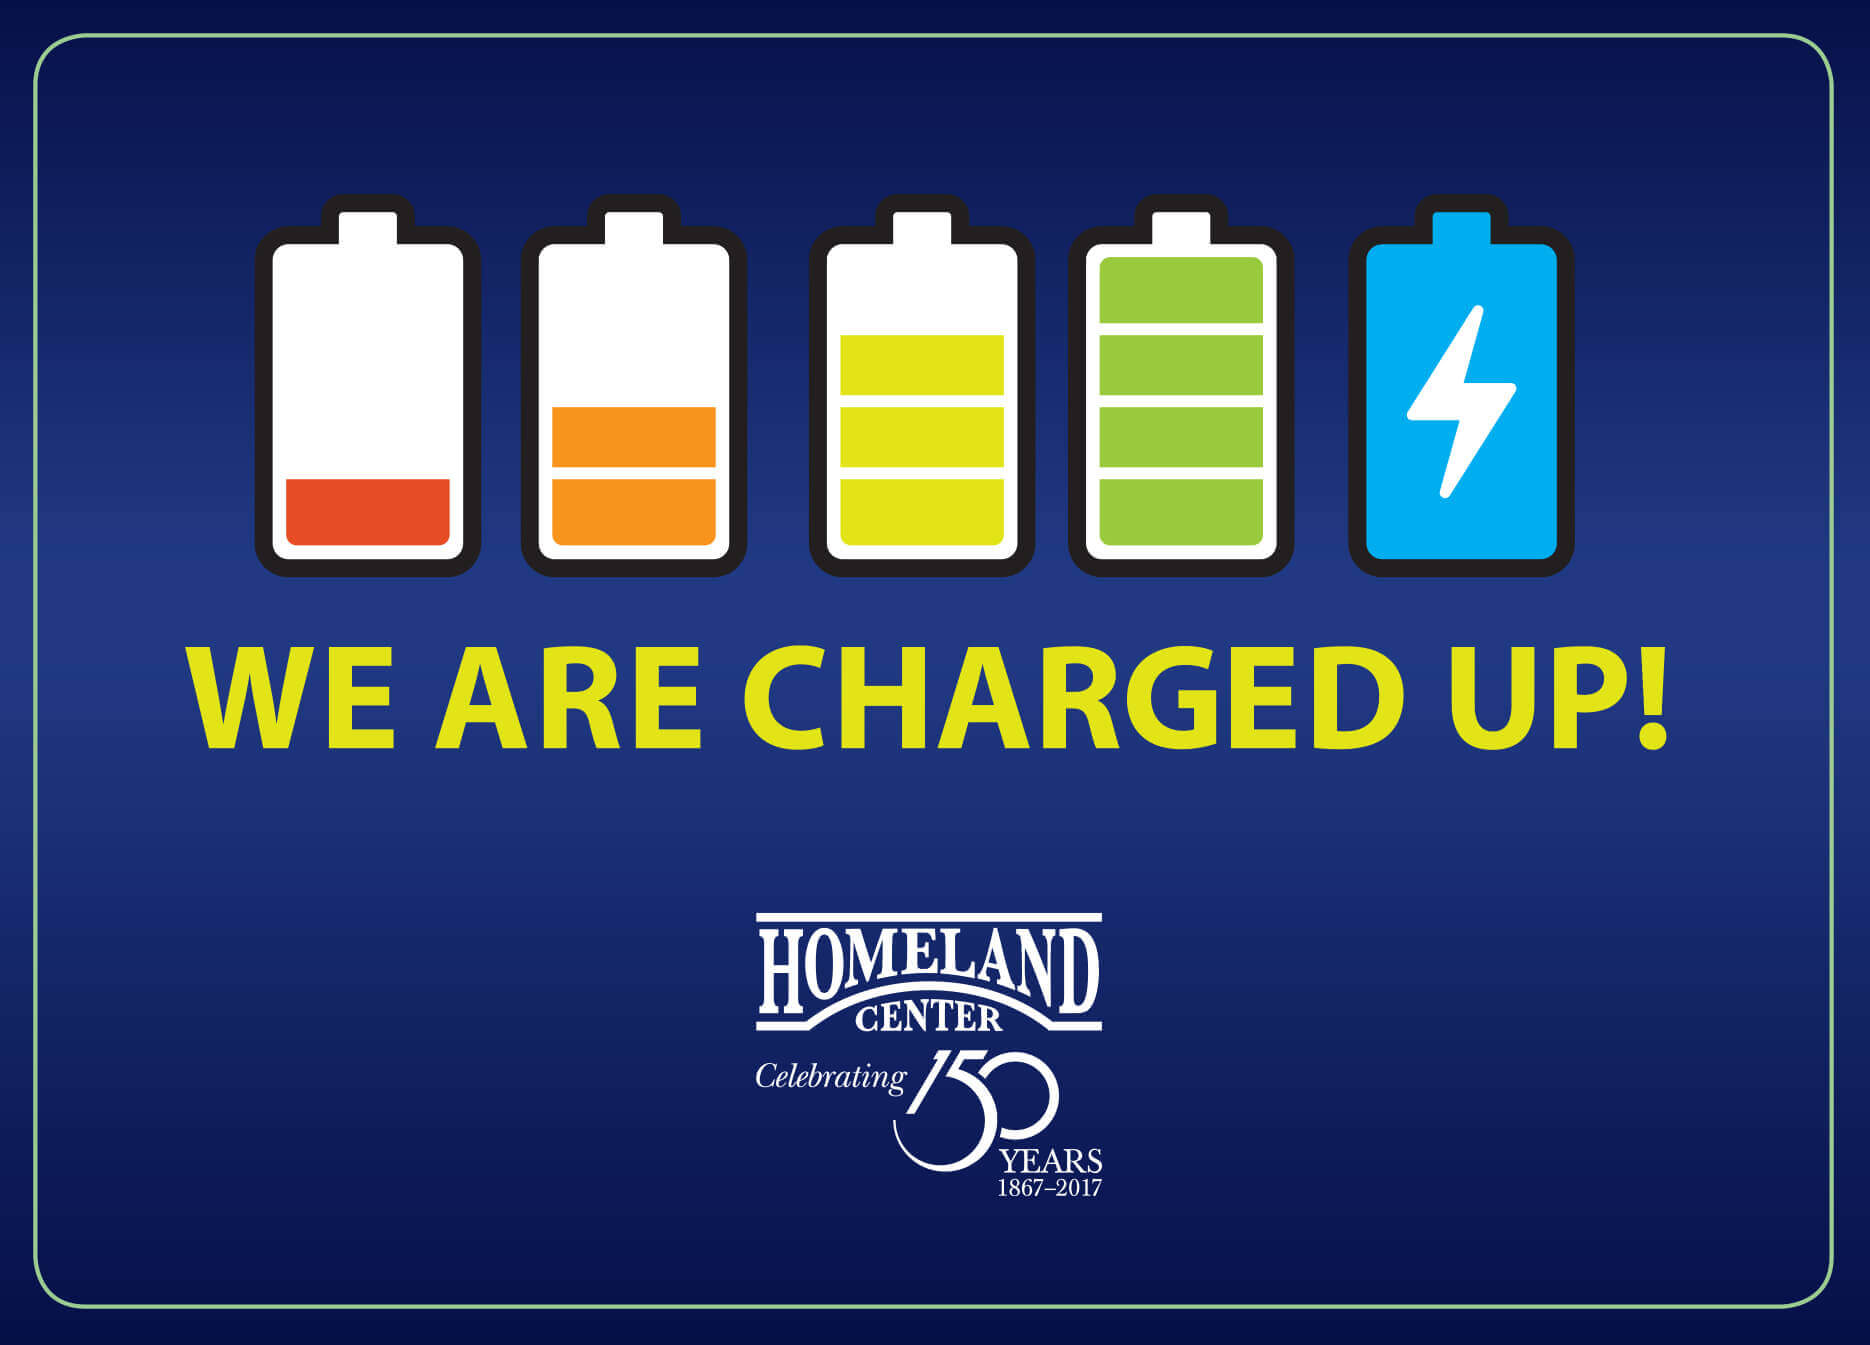 We are charged up!